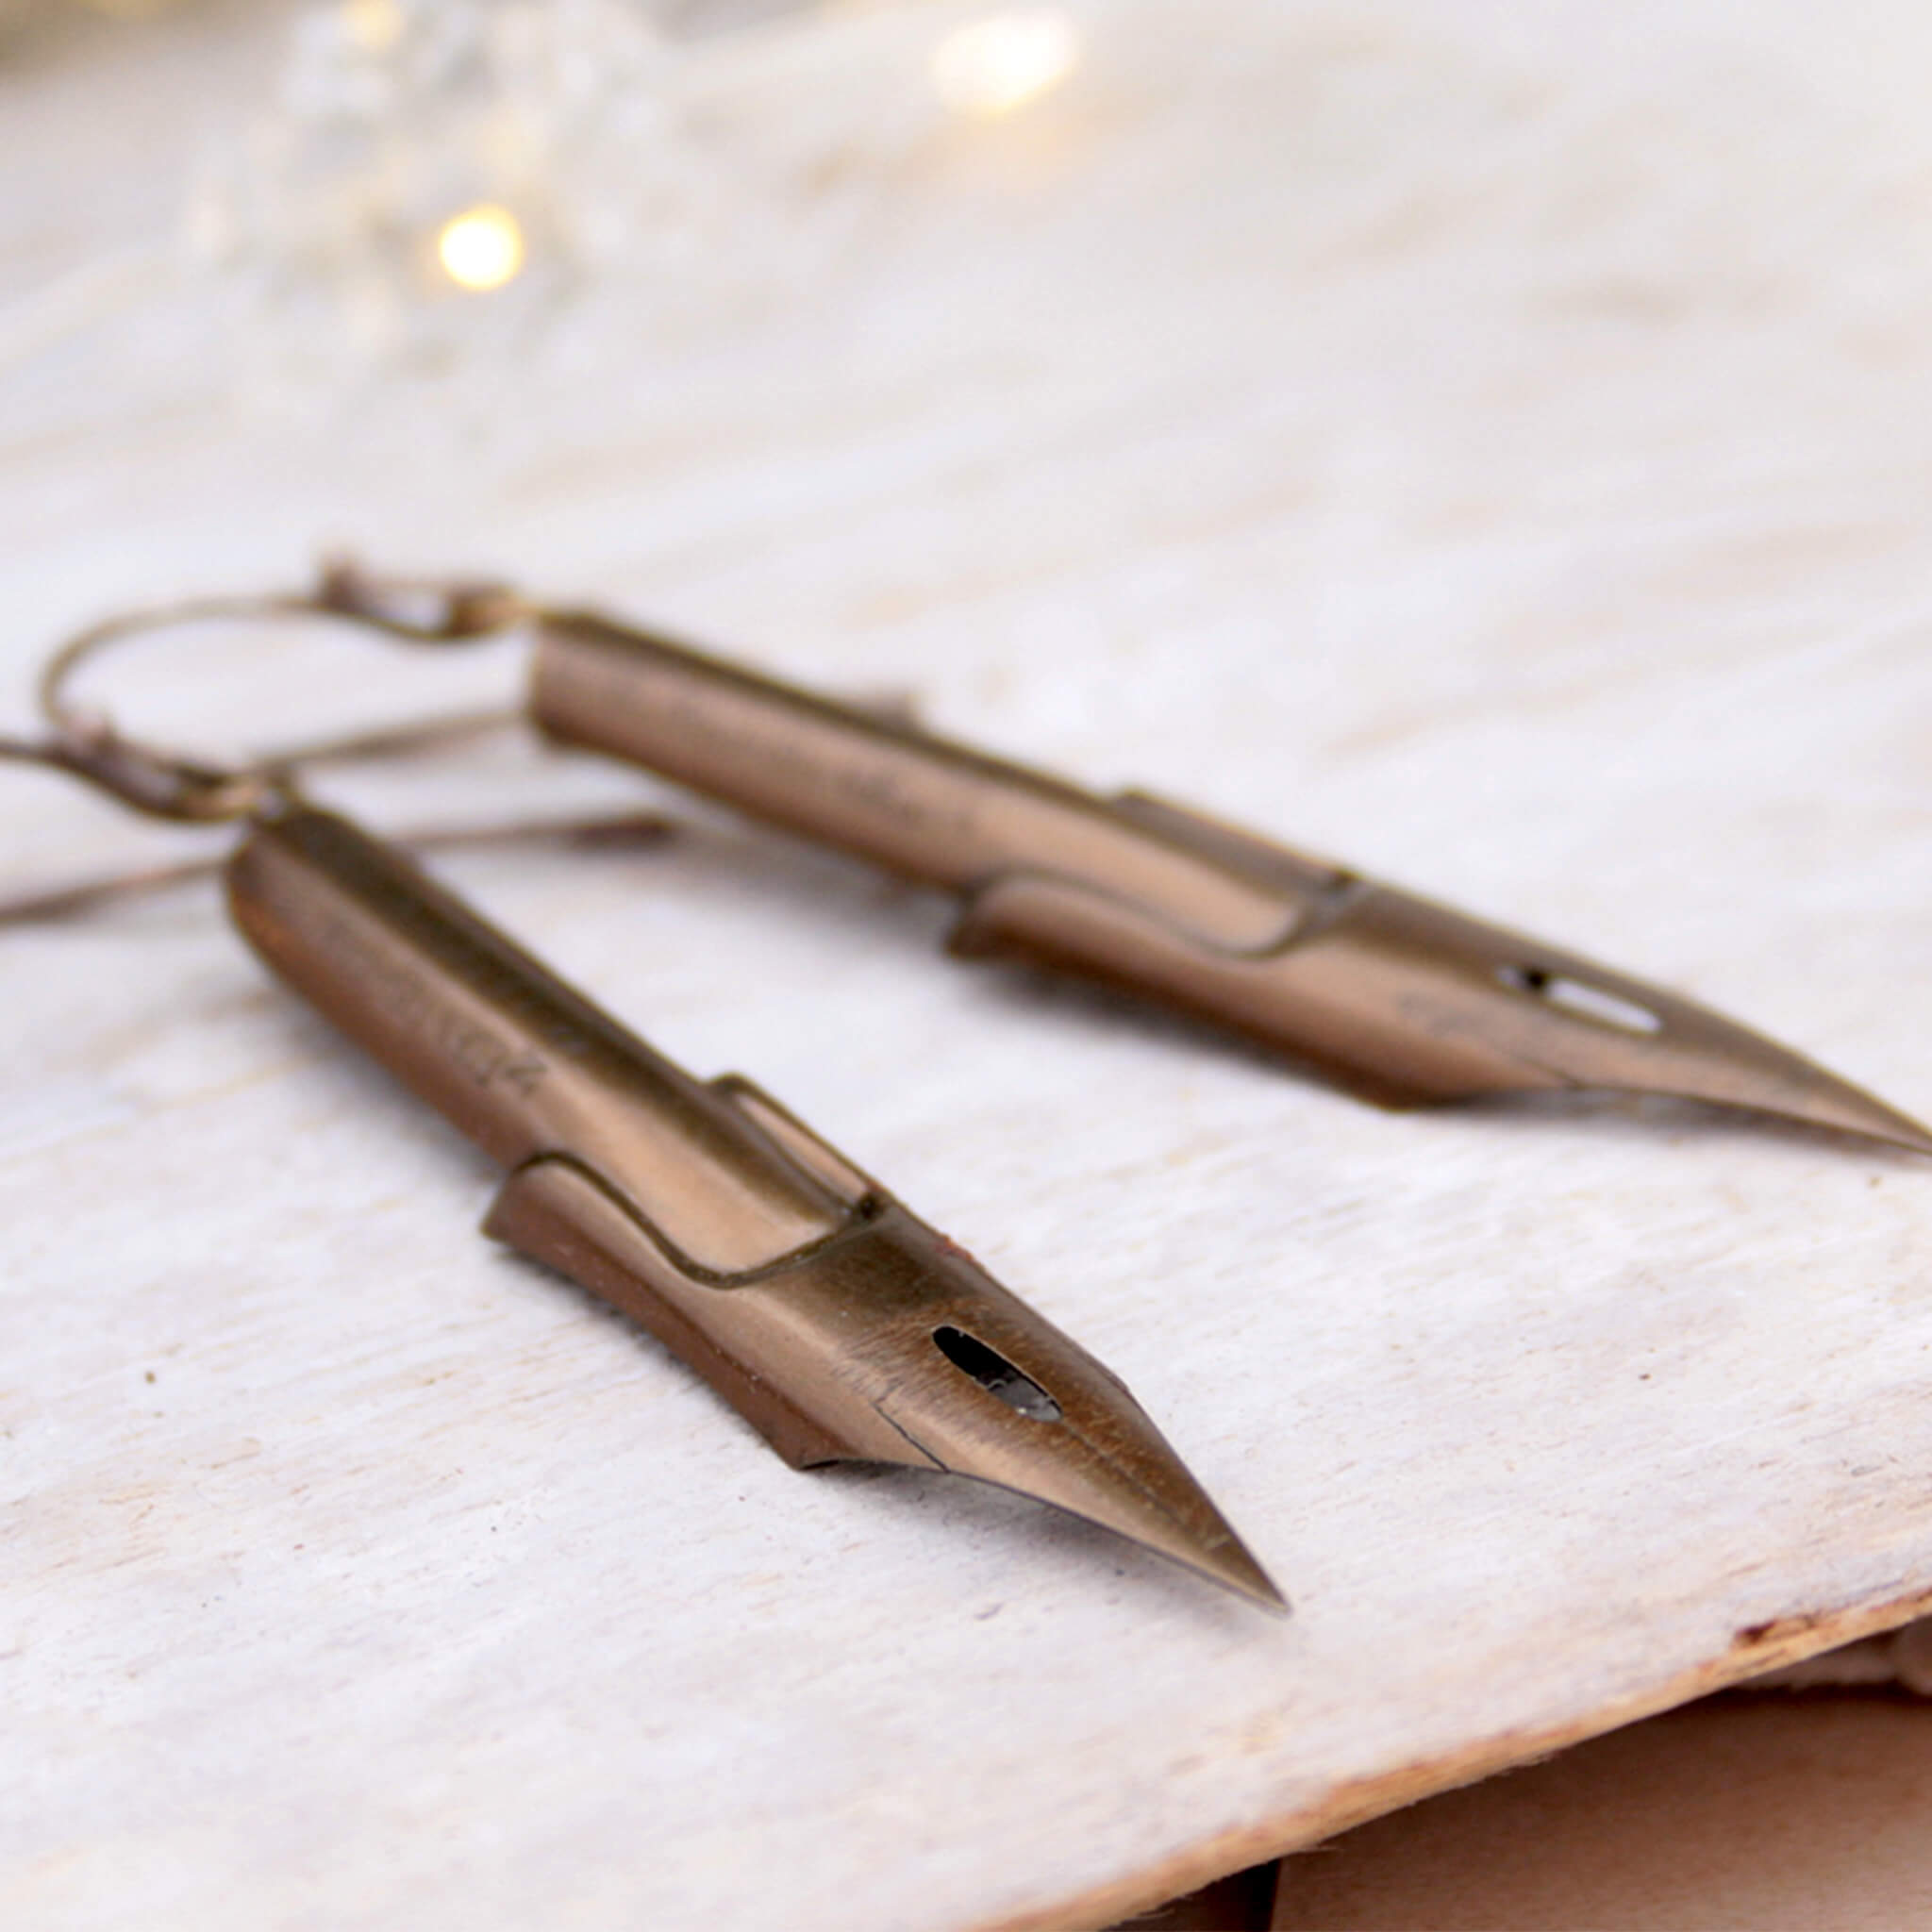 dark academia earrings made of pen nibs in bronze colour lying on a wooden plank painted white